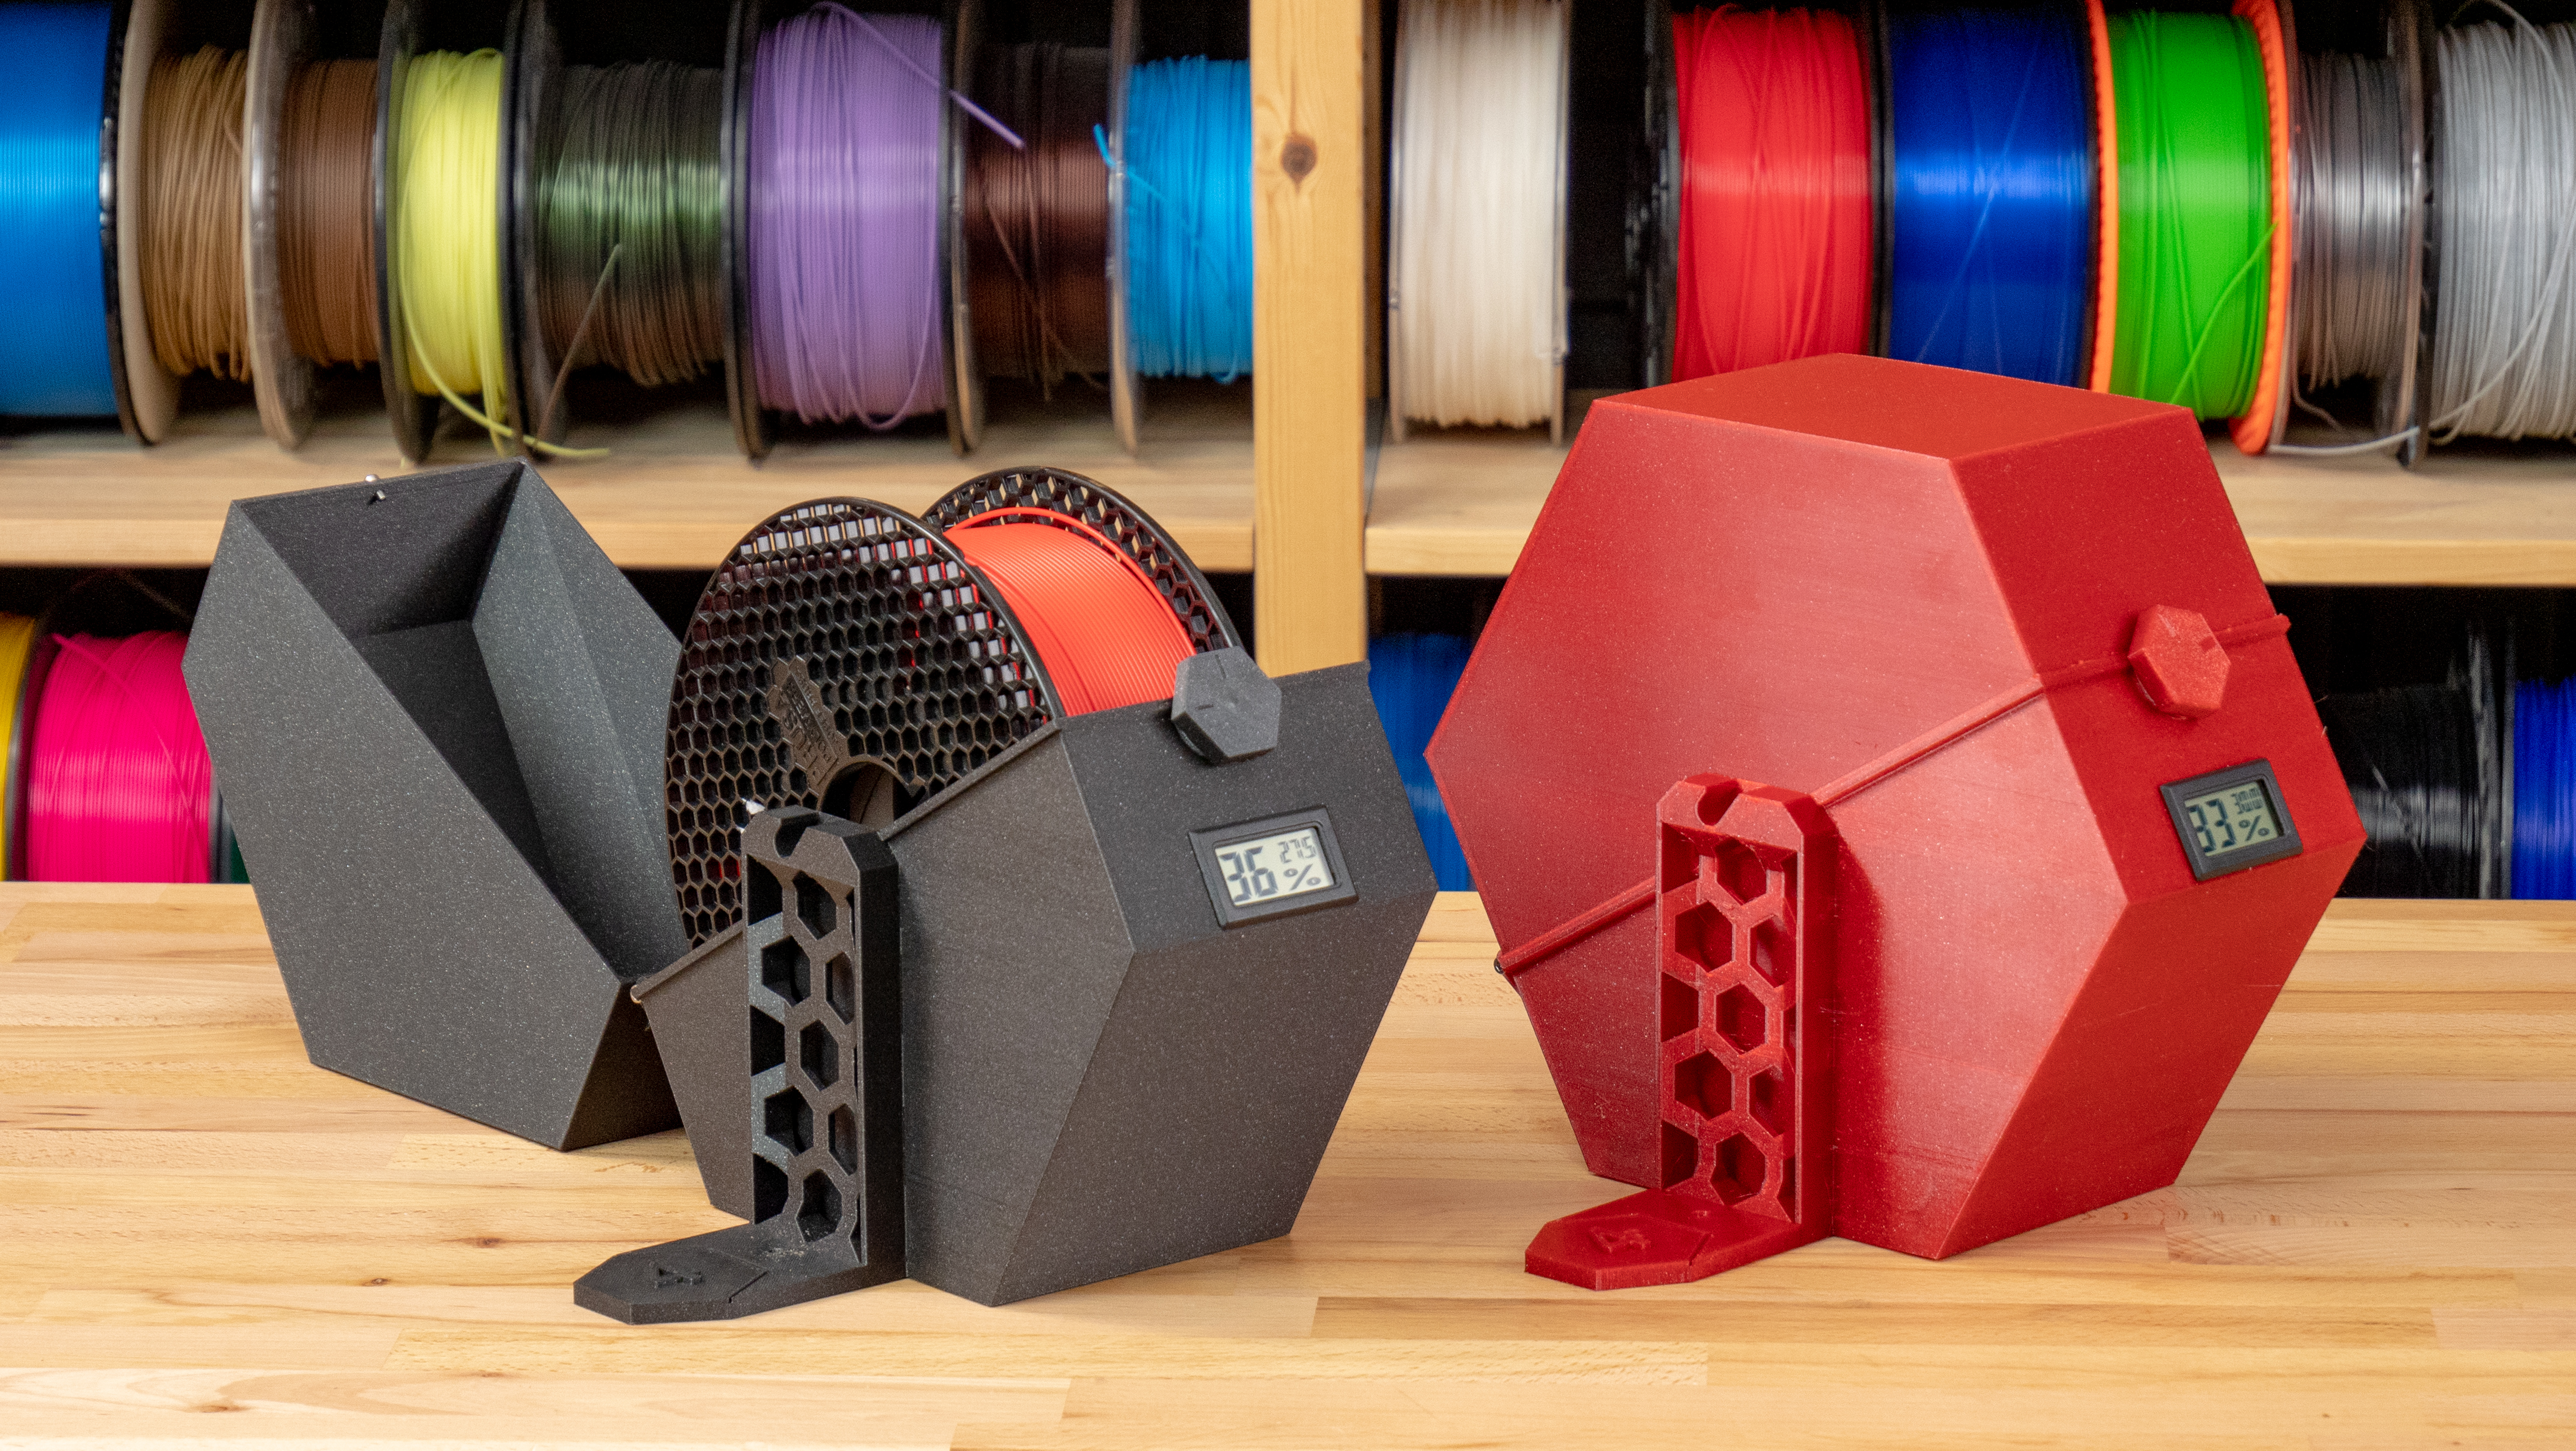 Filament dryboxes and alternative spool holders - not only for